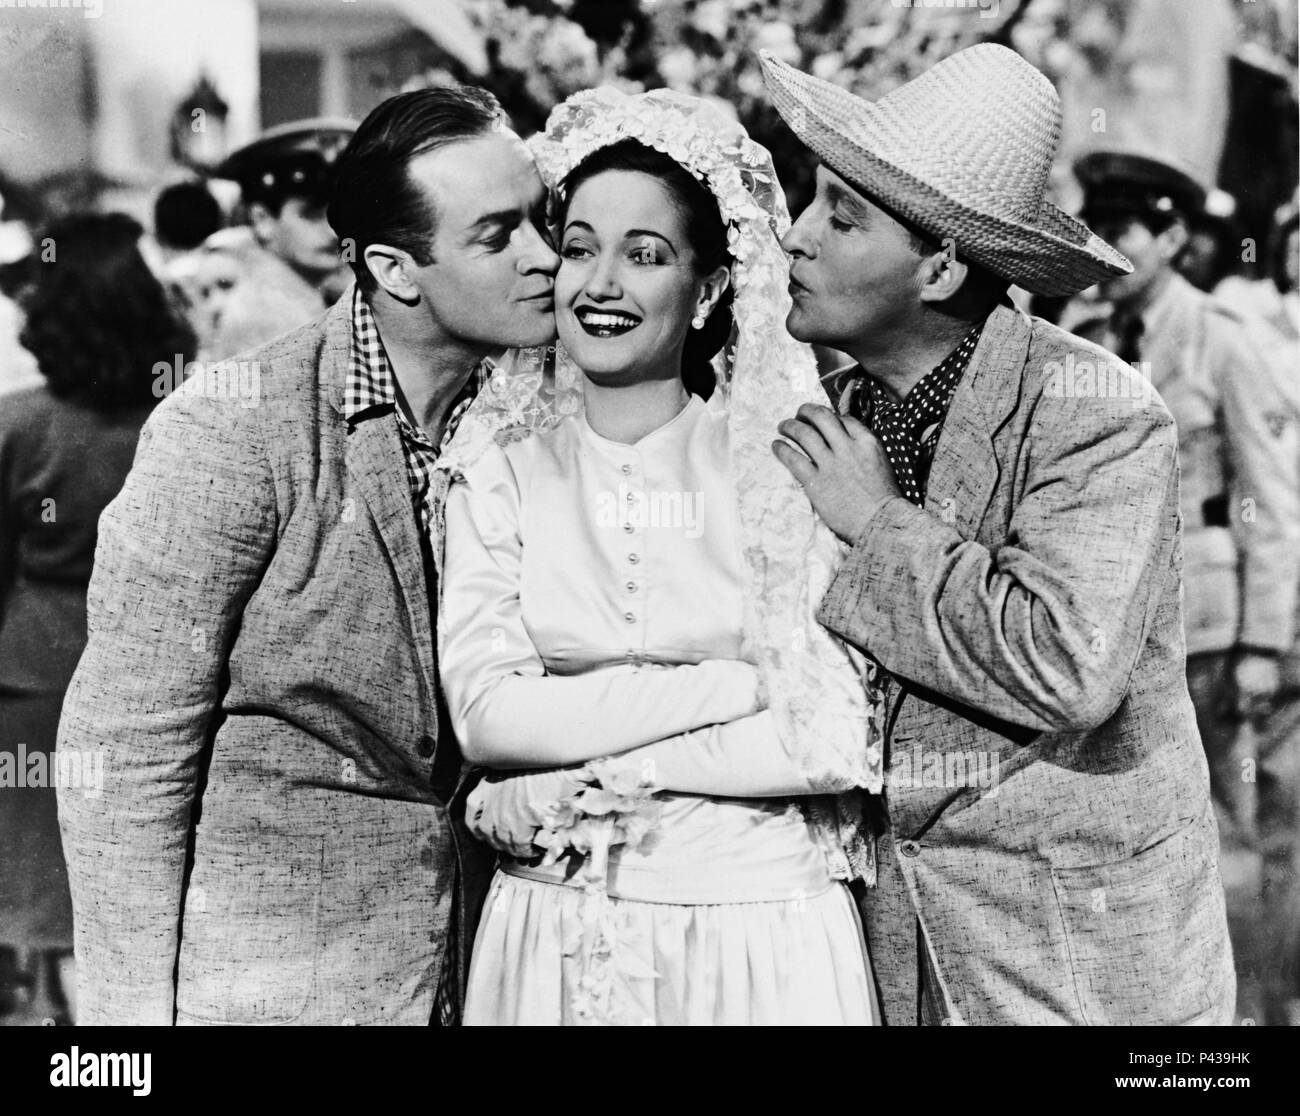 Original Film Title: ROAD TO RIO.  English Title: ROAD TO RIO.  Film Director: NORMAN Z. MCLEOD.  Year: 1947.  Stars: BOB HOPE; BING CROSBY; DOROTHY LAMOUR. Credit: PARAMOUNT PICTURES / Album Stock Photo